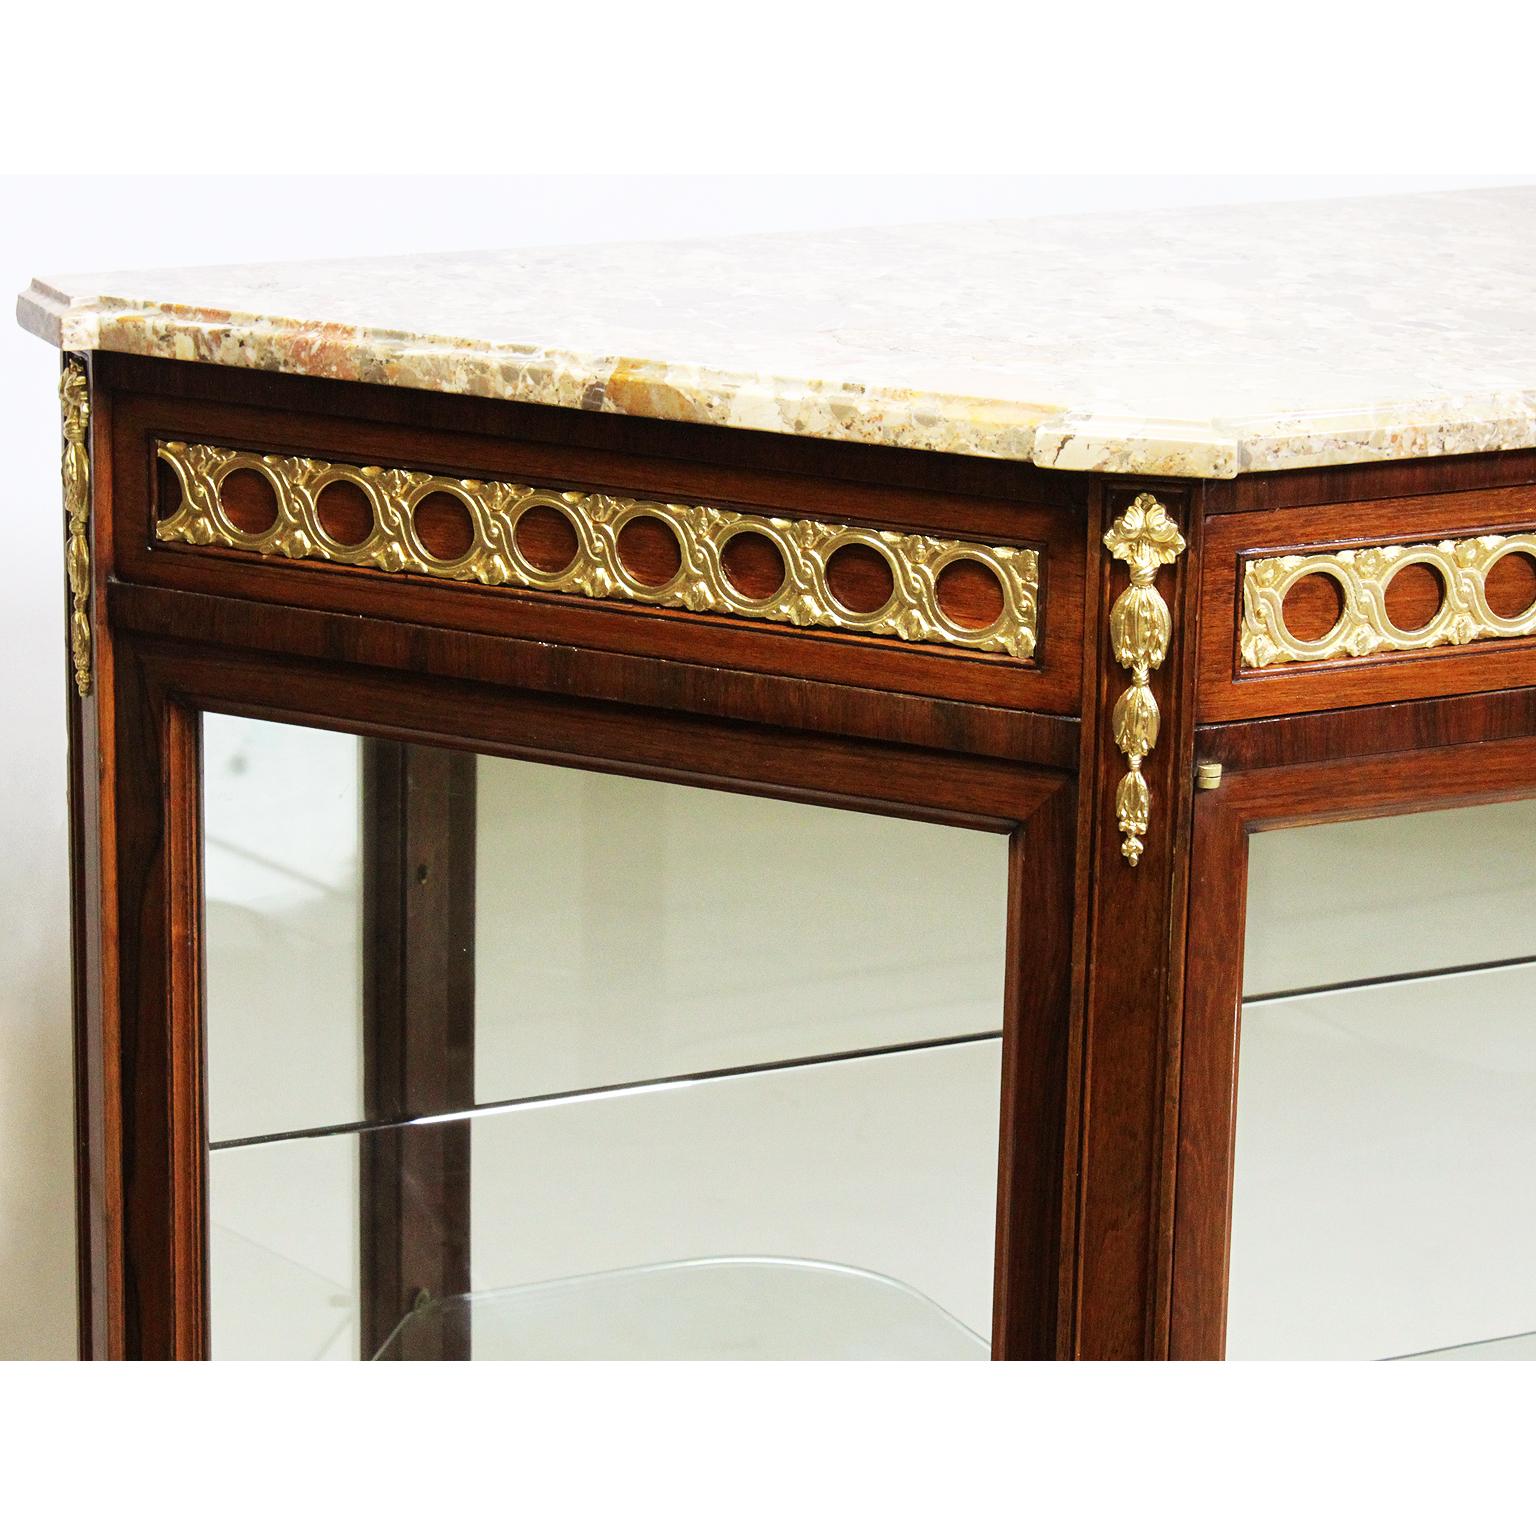 Glass French Louis XVI Style Mahogany and Gilt-Bronze Mounted Sever Exhibition Vitrine For Sale